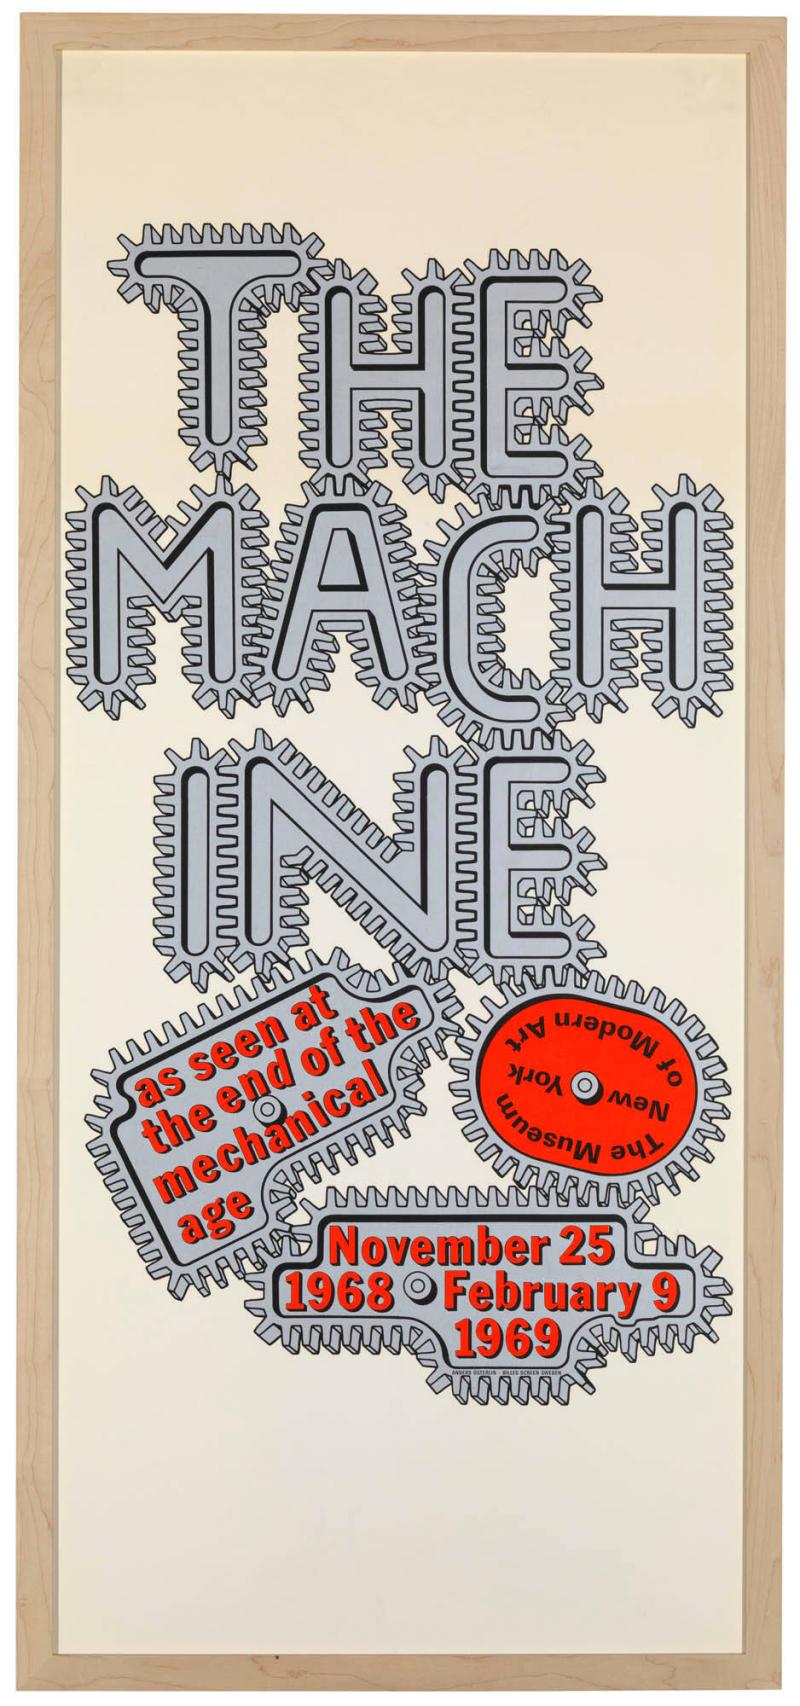 The Machine as seen at the end of the mechanical age